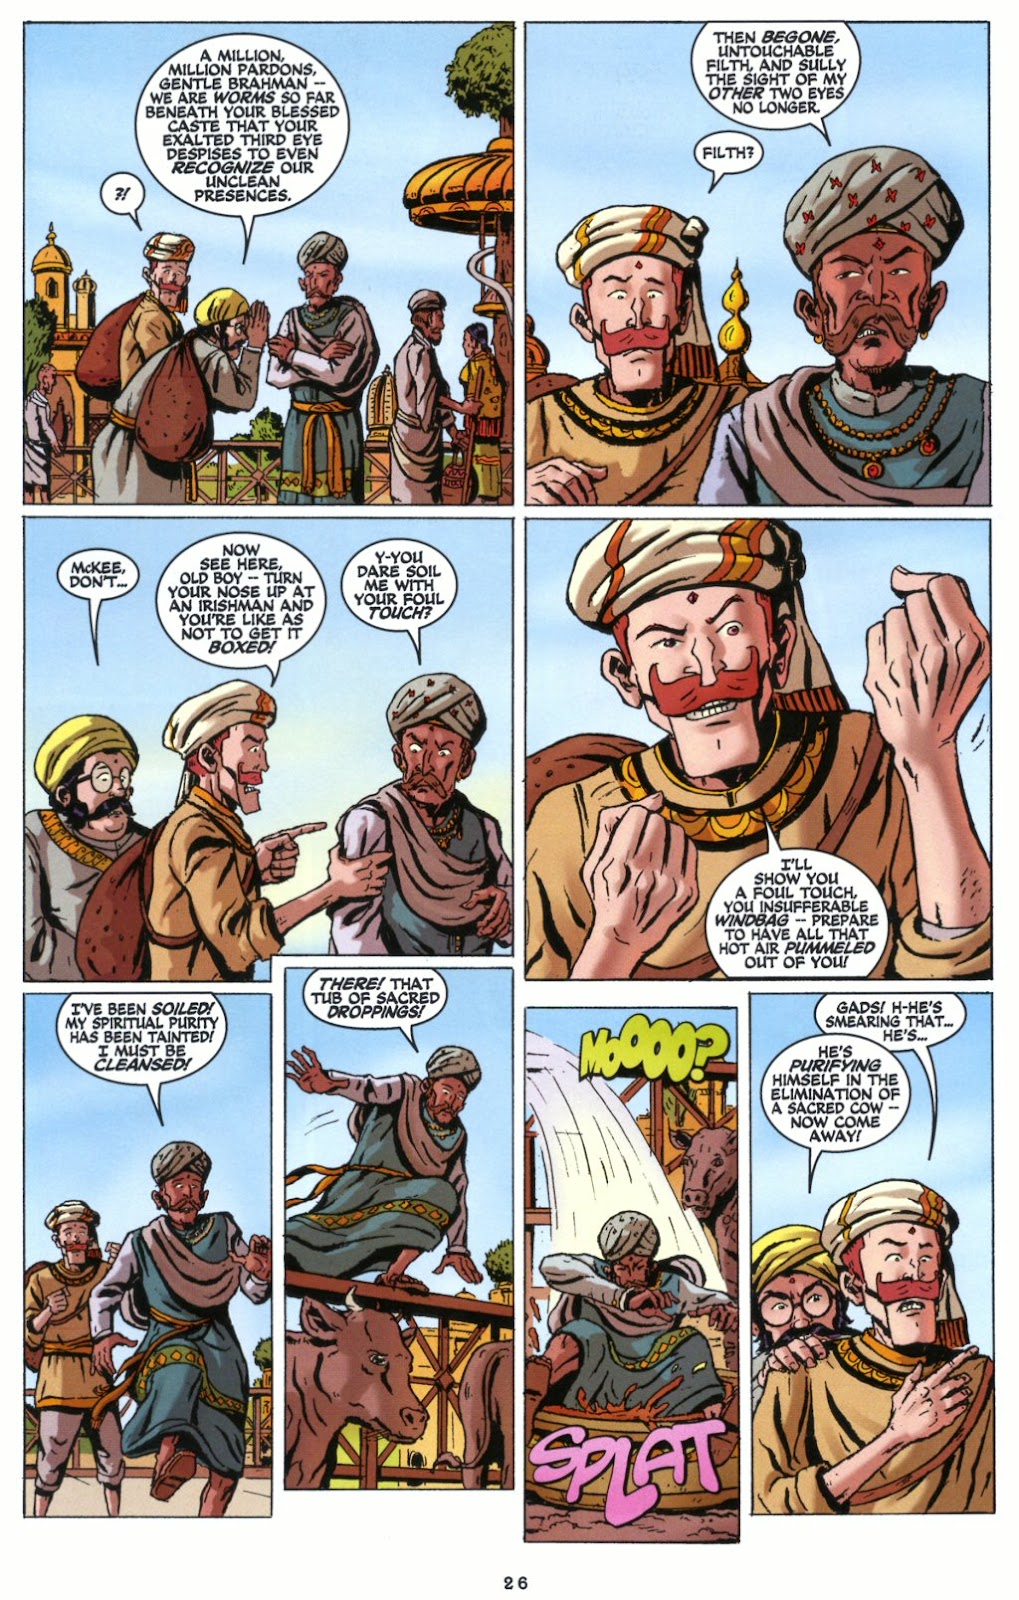 The Remarkable Worlds of Professor Phineas B. Fuddle issue 3 - Page 25